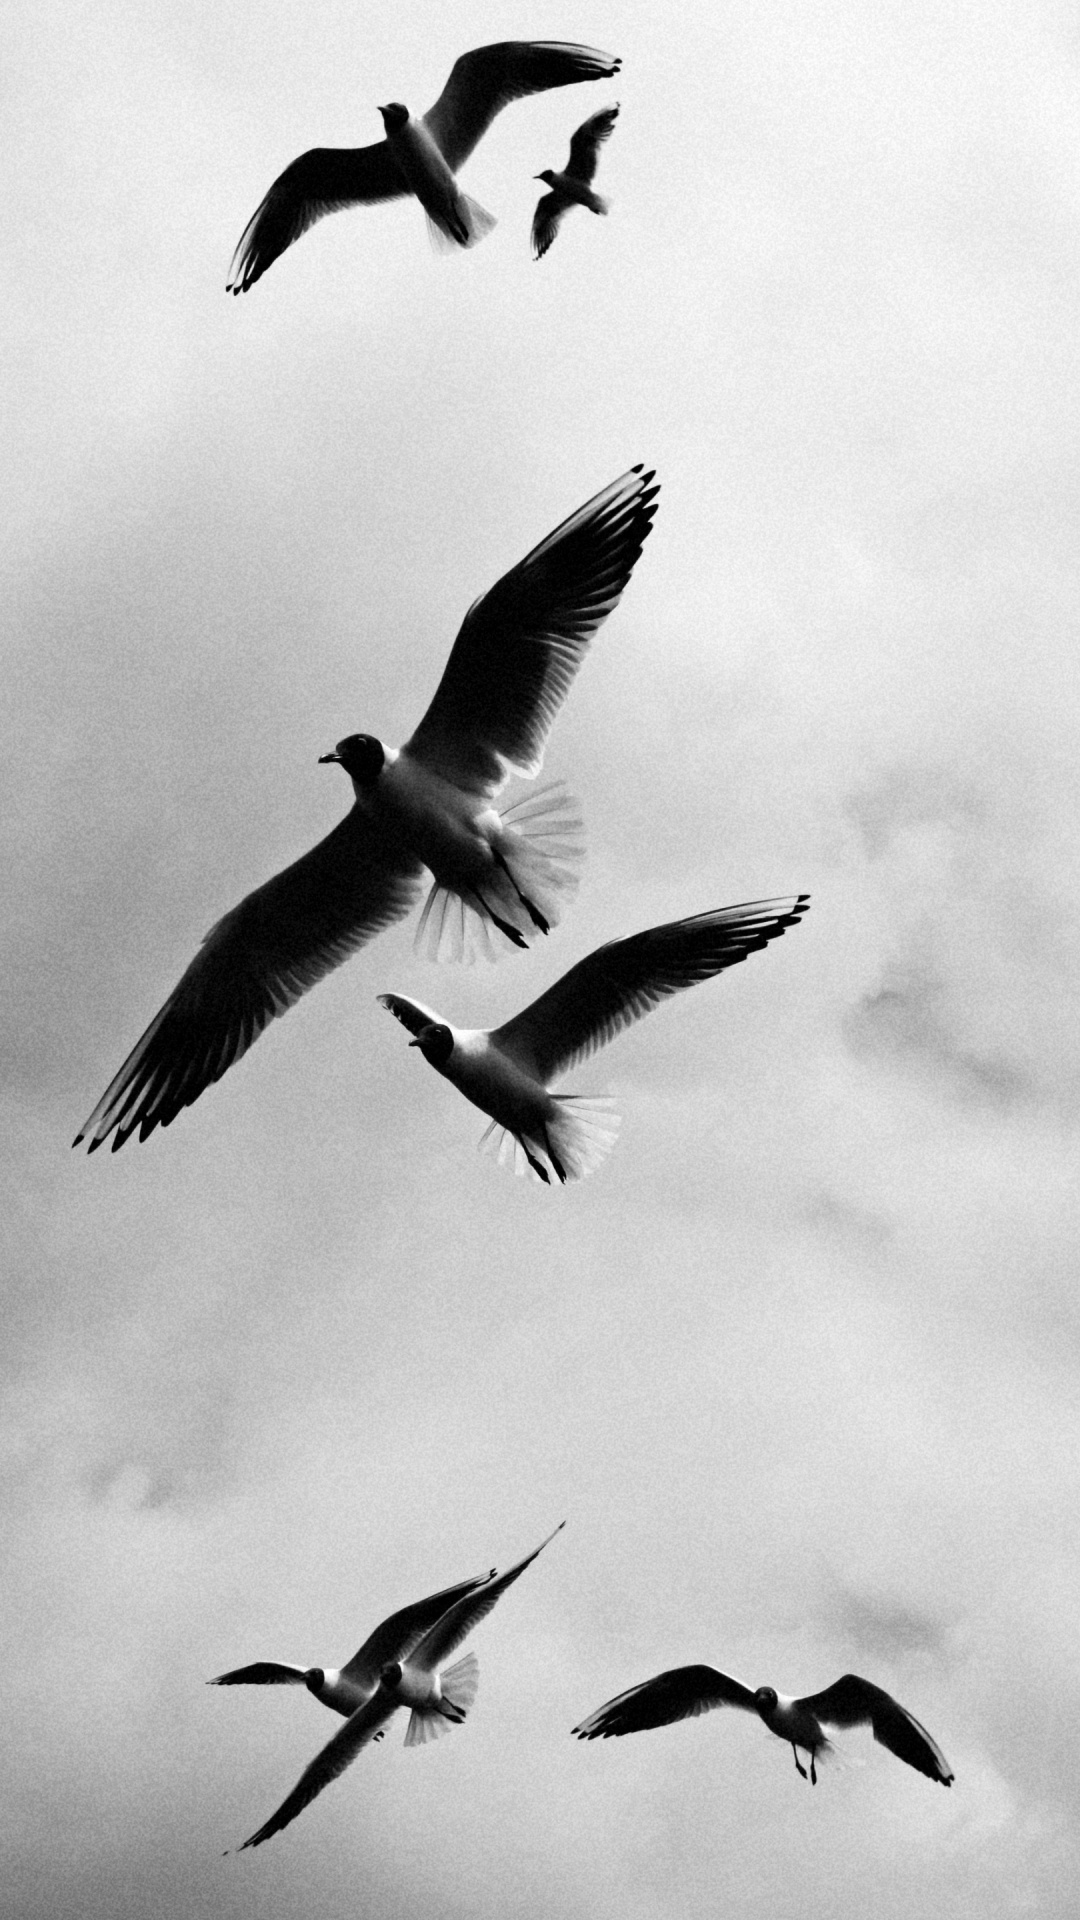 Grayscale Photography of Birds Flying. Wallpaper in 1080x1920 Resolution